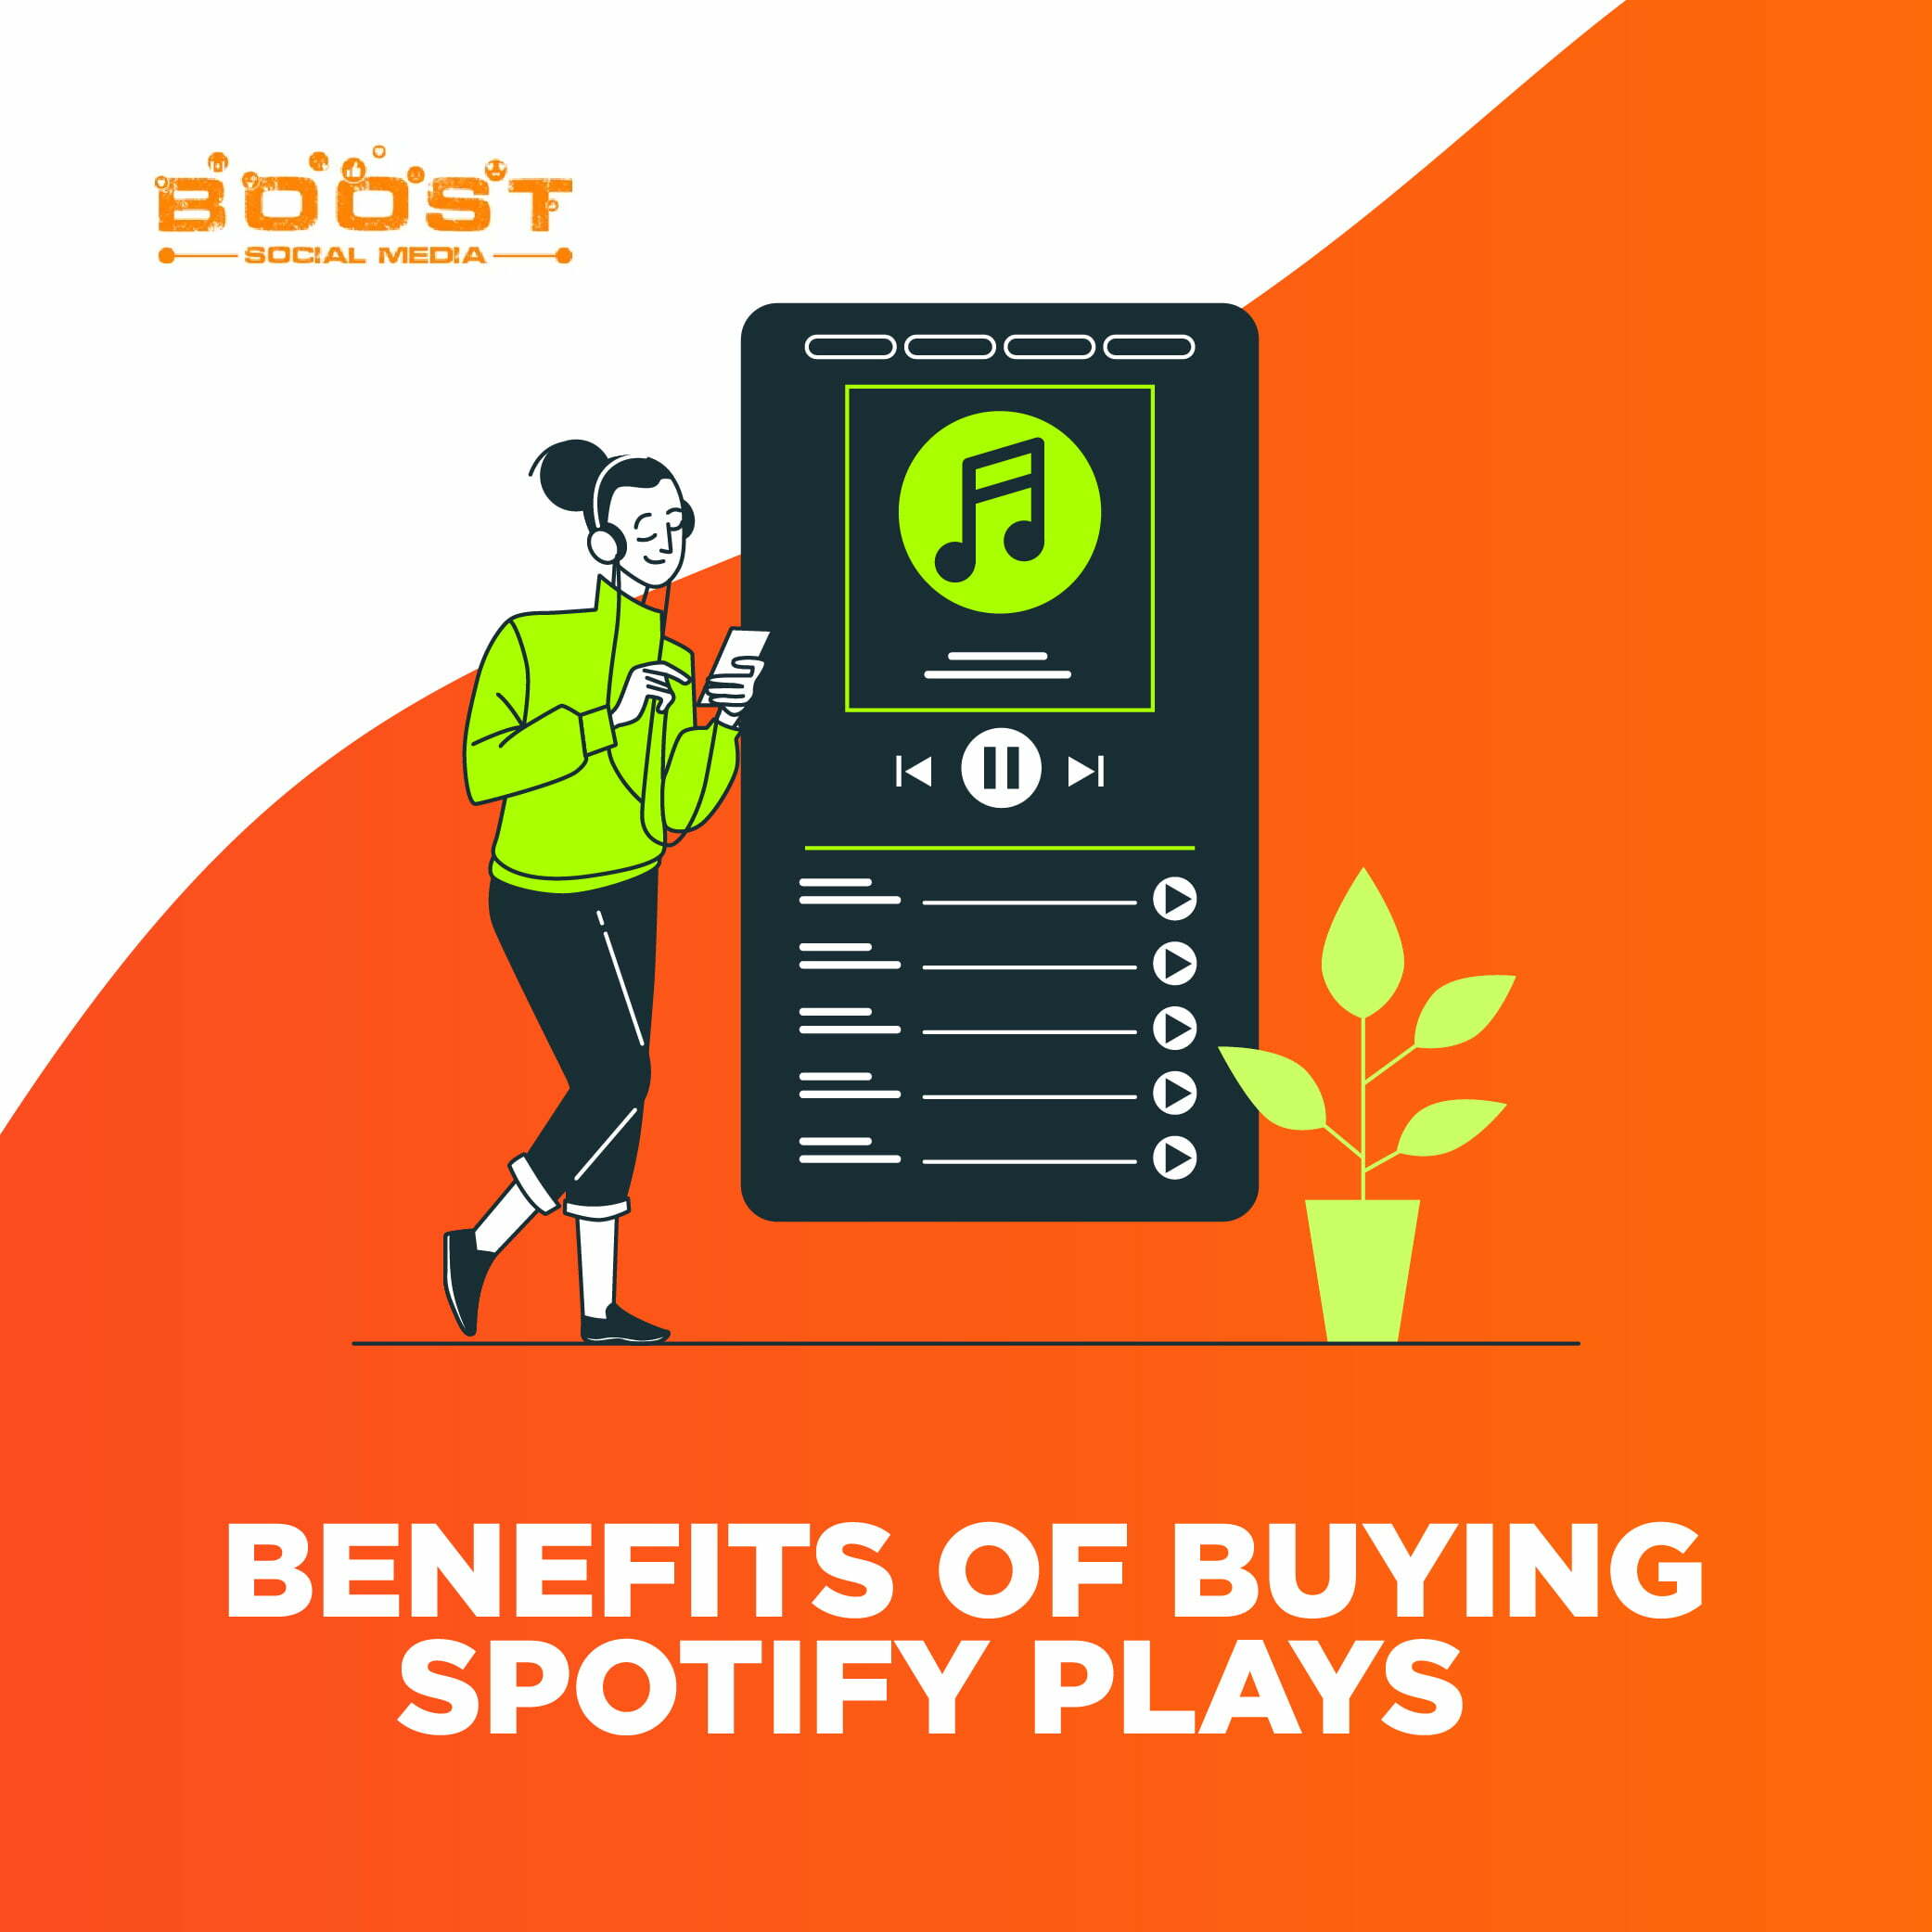 Benefits of Buying Spotify Plays